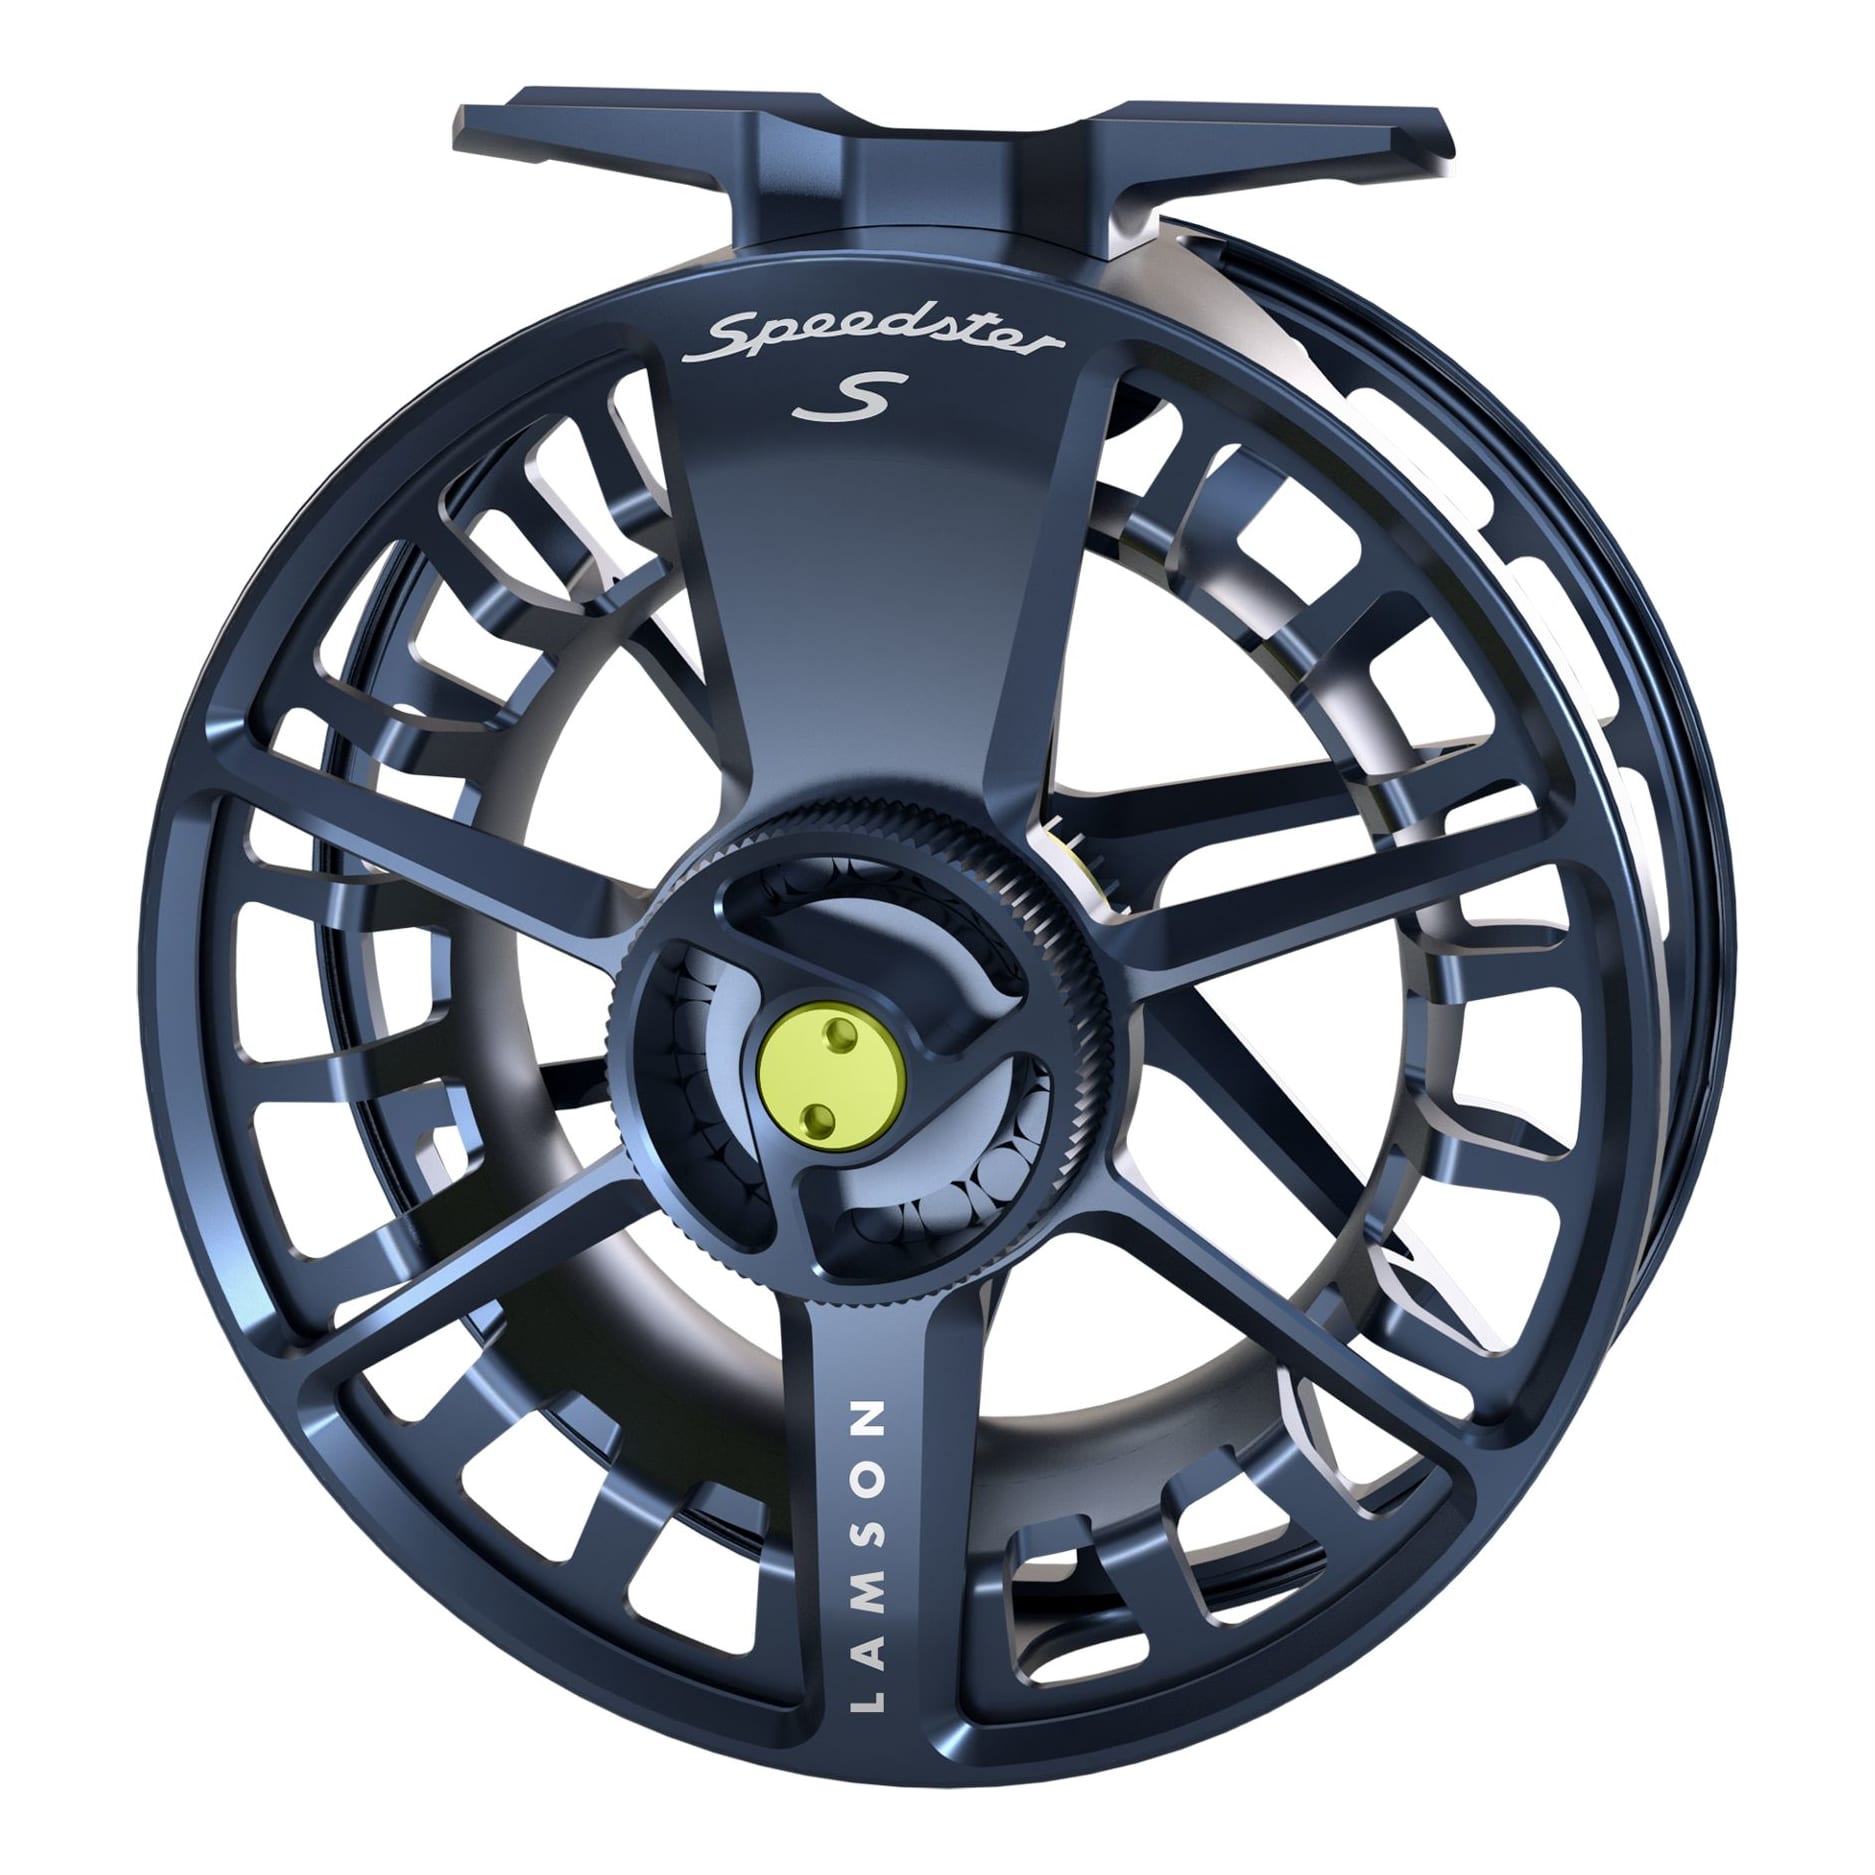 Orvis USA Battenkill Disc 3/4 alloy fly reel Made in England, 2.75 spool,  counter balanced handle